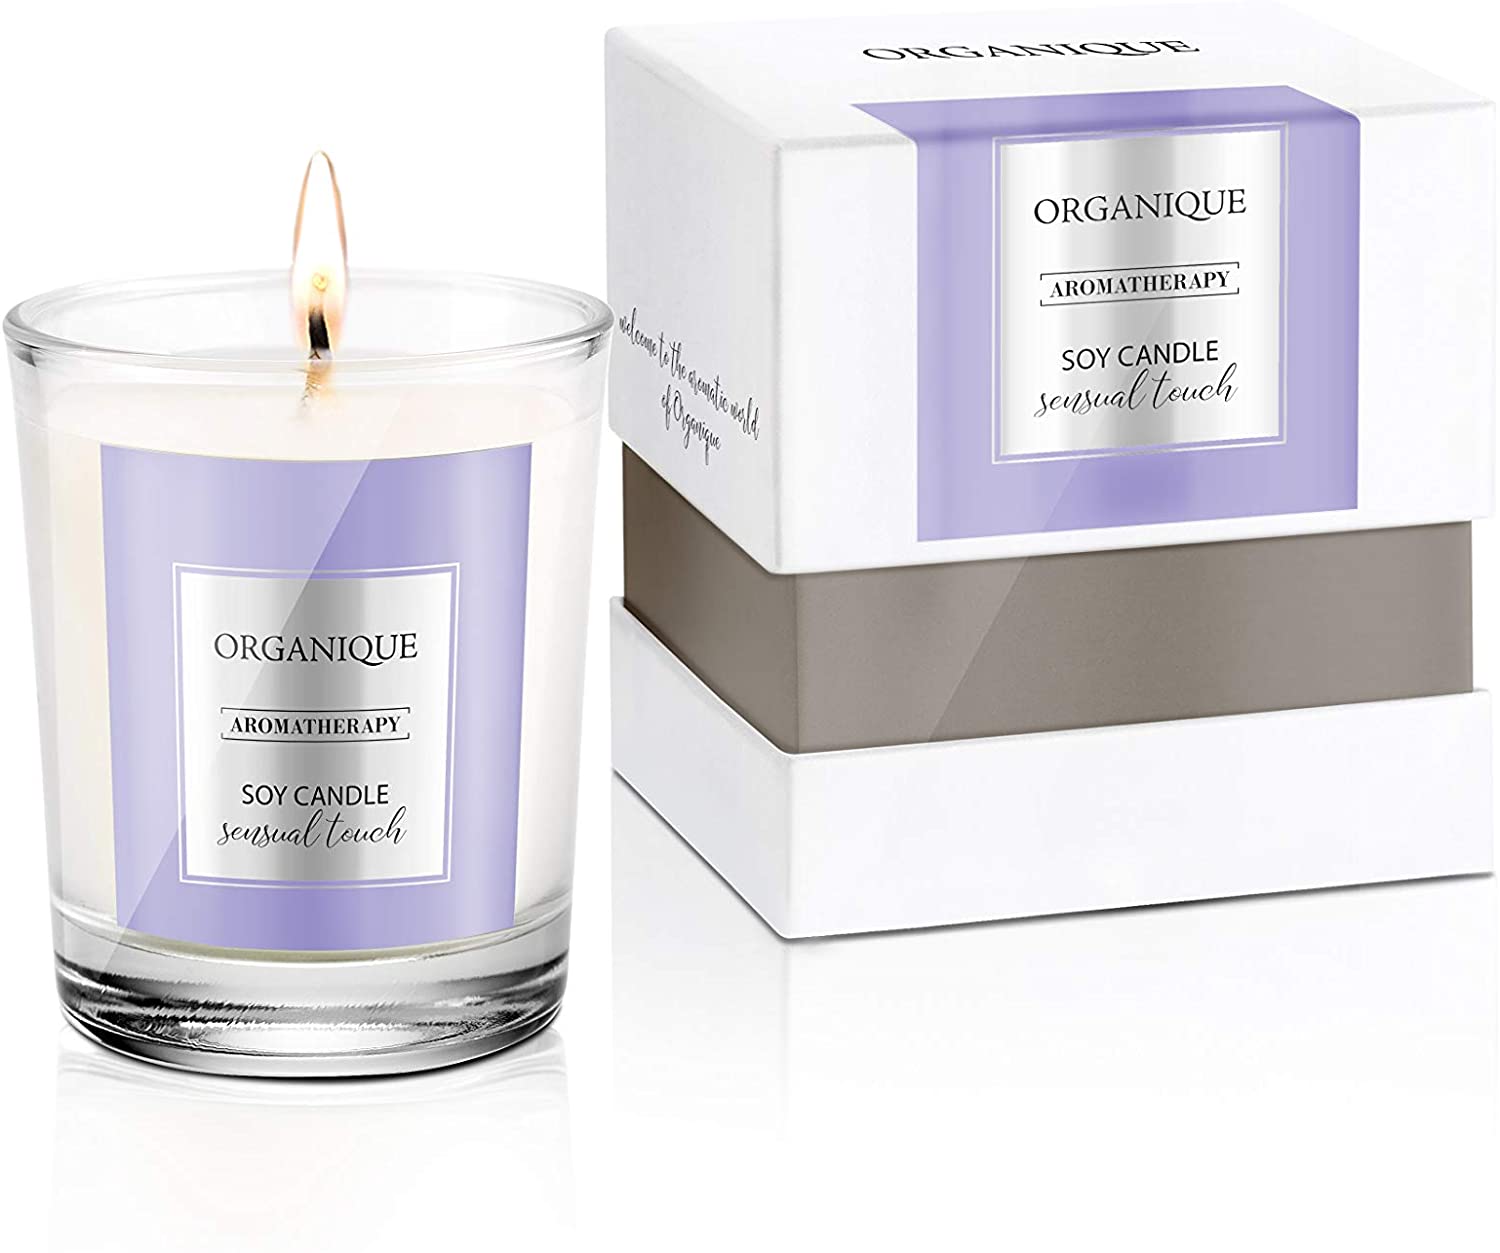 Organique Soy Candle sensual touch klein